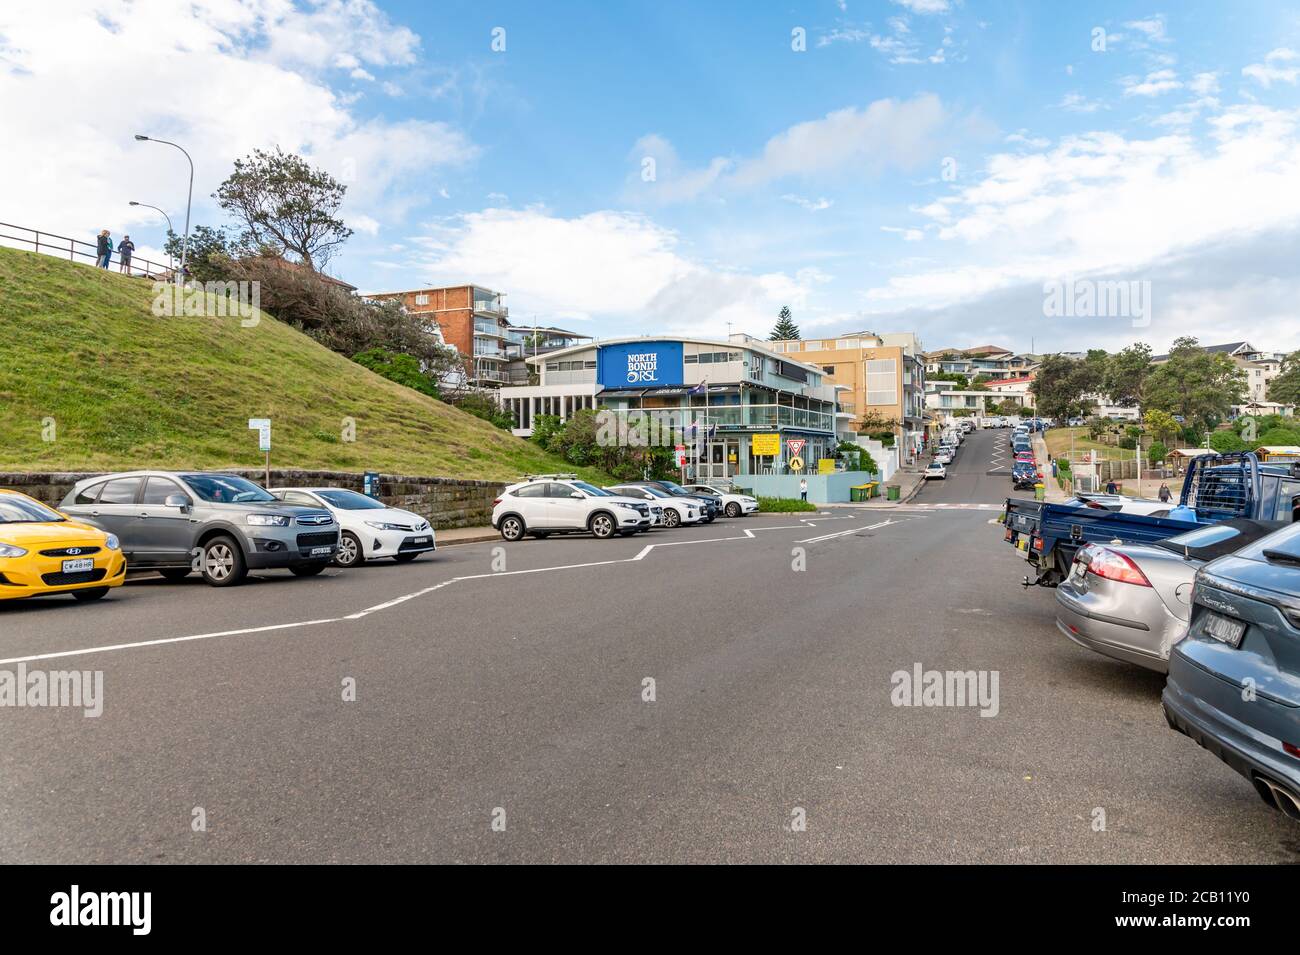 Off street car park and North Bondi RSL Club Background on a sunny autumn afternoon with blue sky and clouds Stock Photo